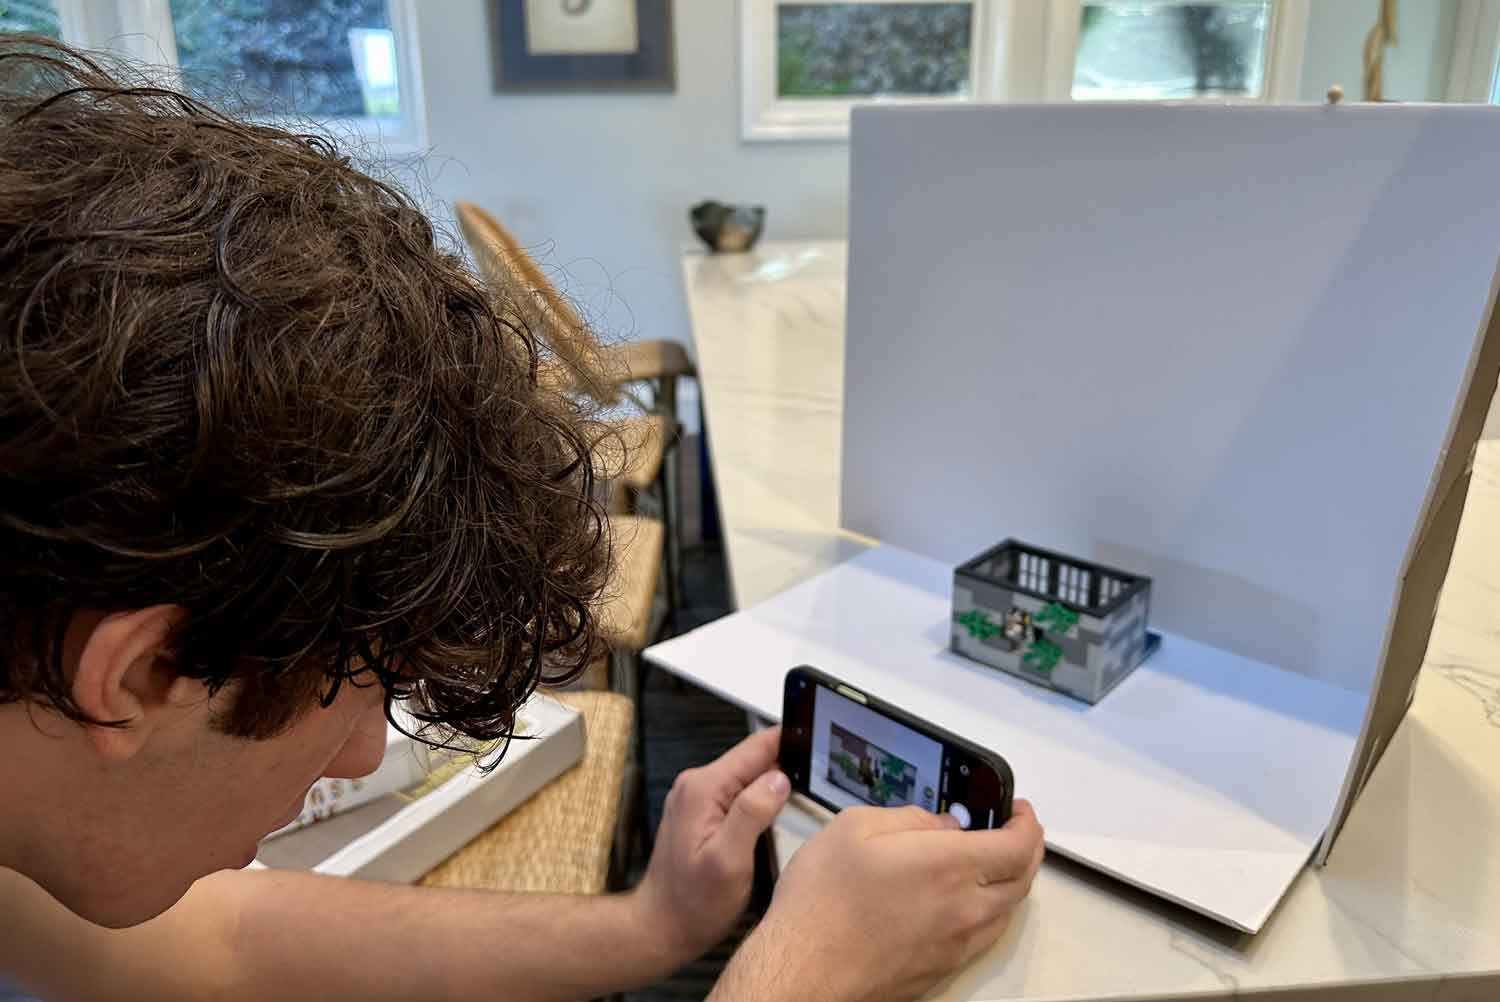 A teen takes a photo of a constructed LEGO set.